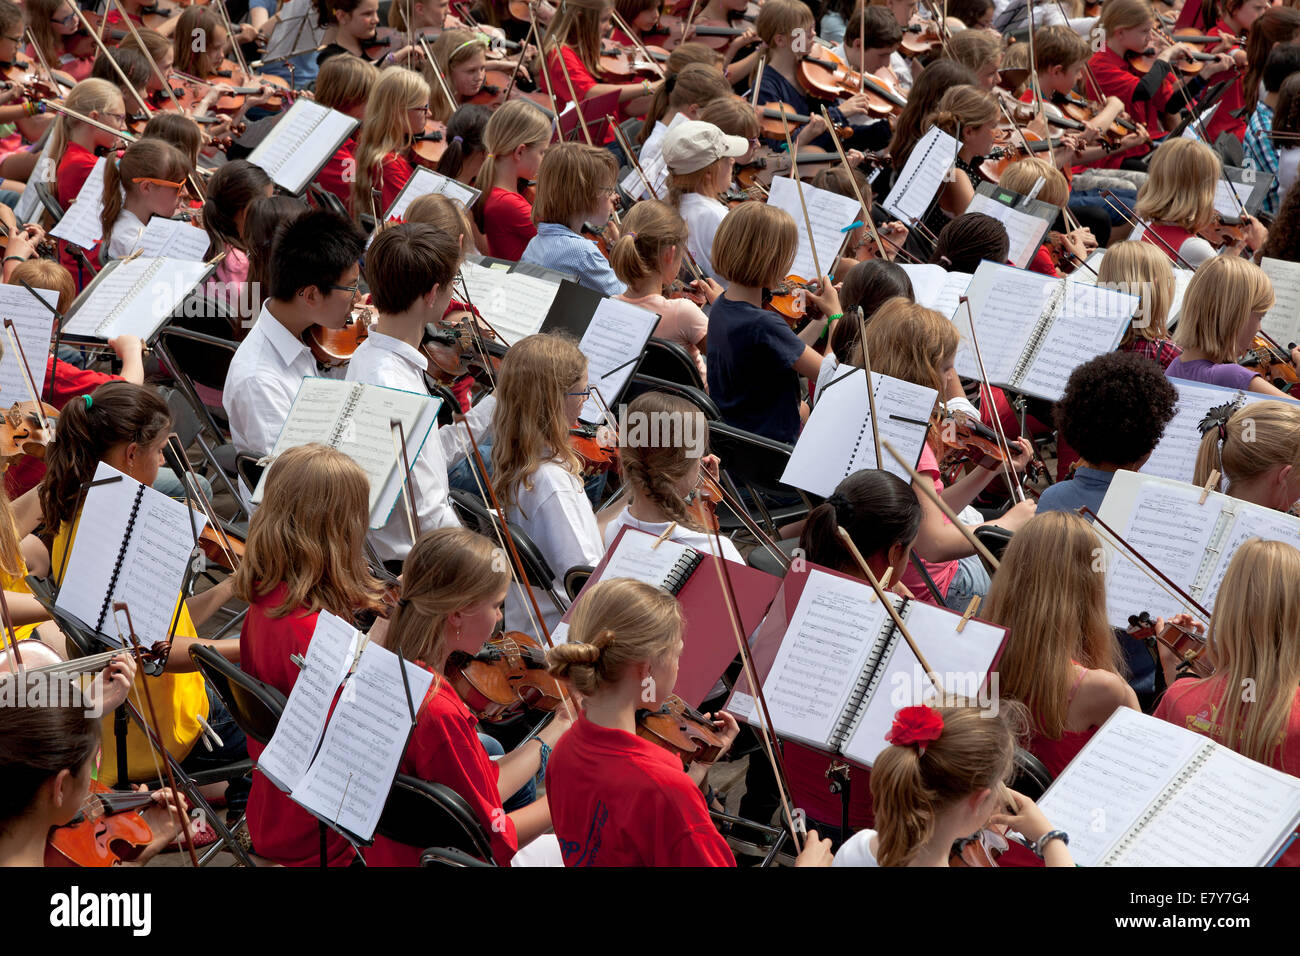 Childrens orchestra playing violins Stock Photo